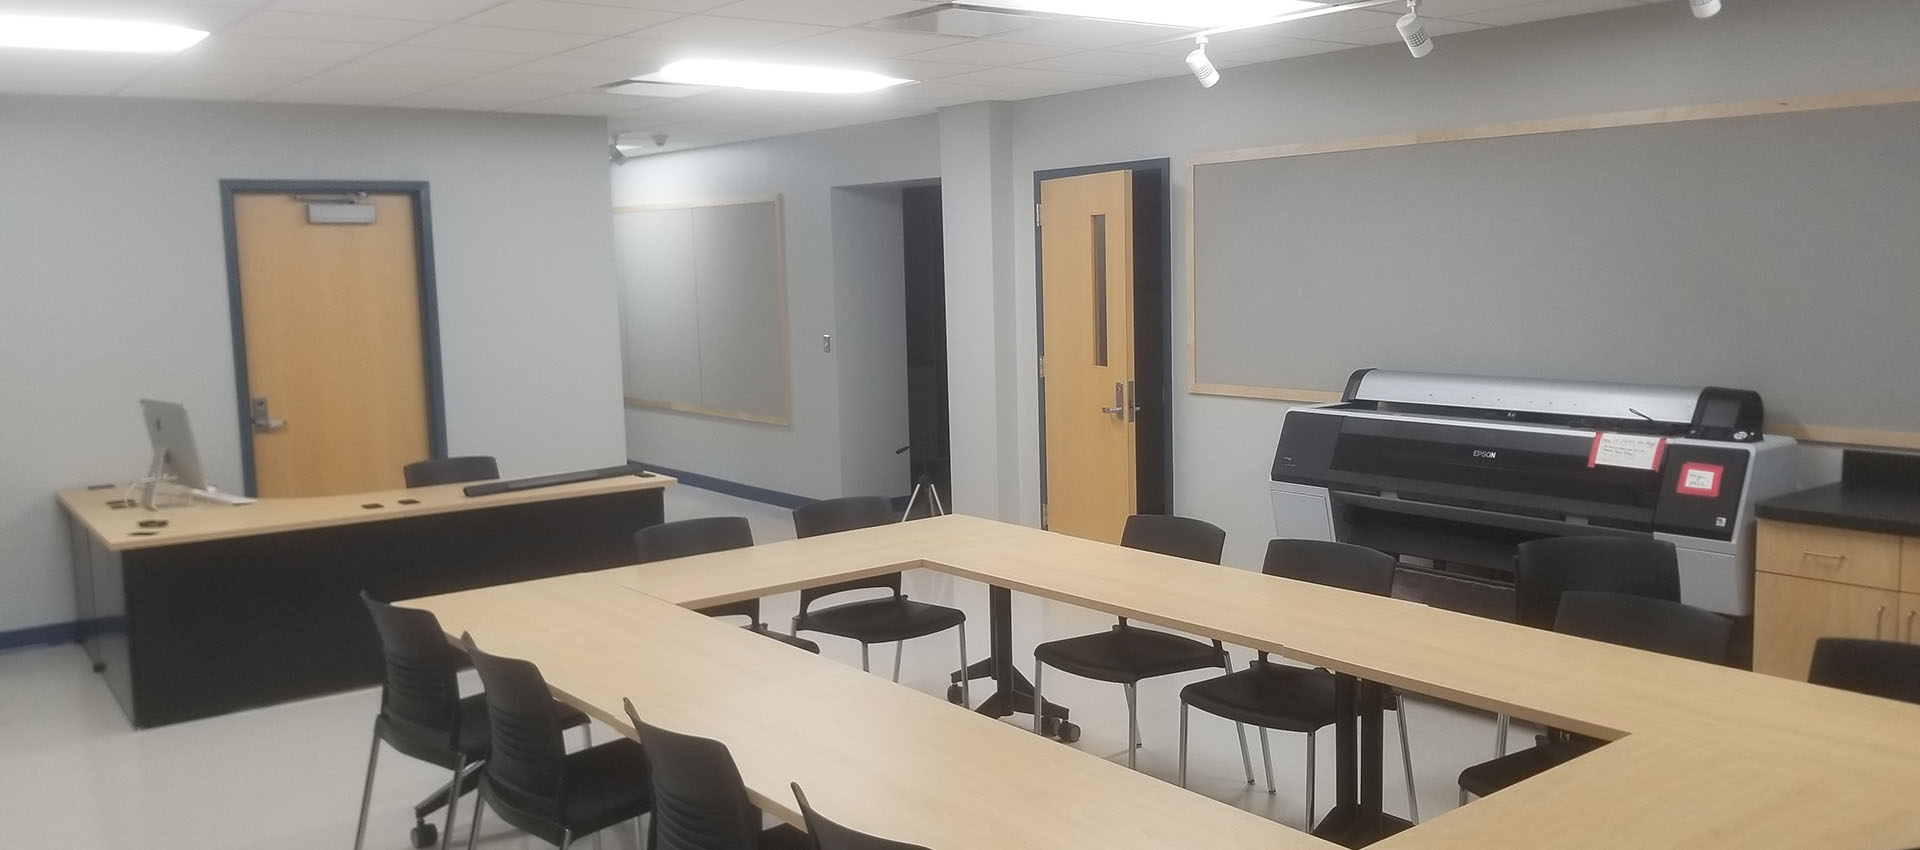 WING 27 classroom with a modern L-shaped light wood-top desk at the front, and moveable modern light wood-top tables and black hard resin chairs set up in a circle formation in the center of the room, with a large format printer in the background